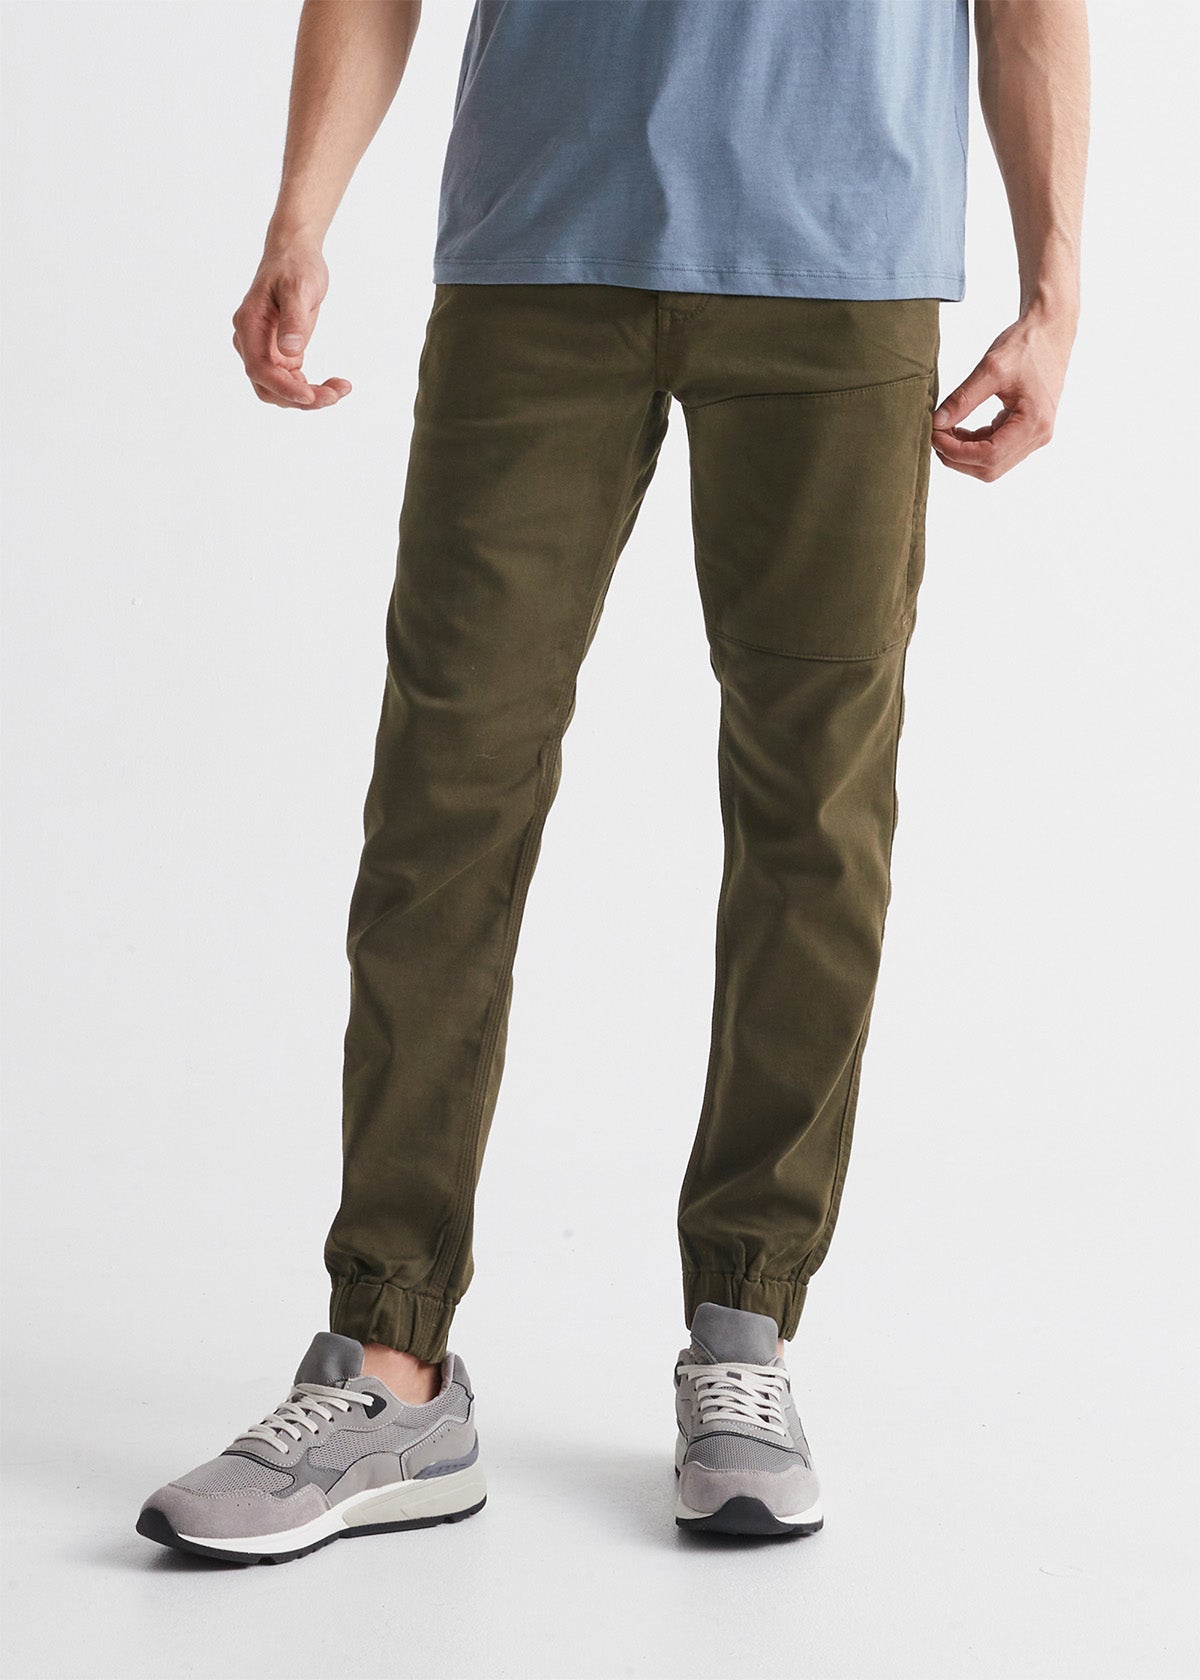 Medium - Womens Knit Mid-Rise Jogger Pants - All in Motion - Olive Green 